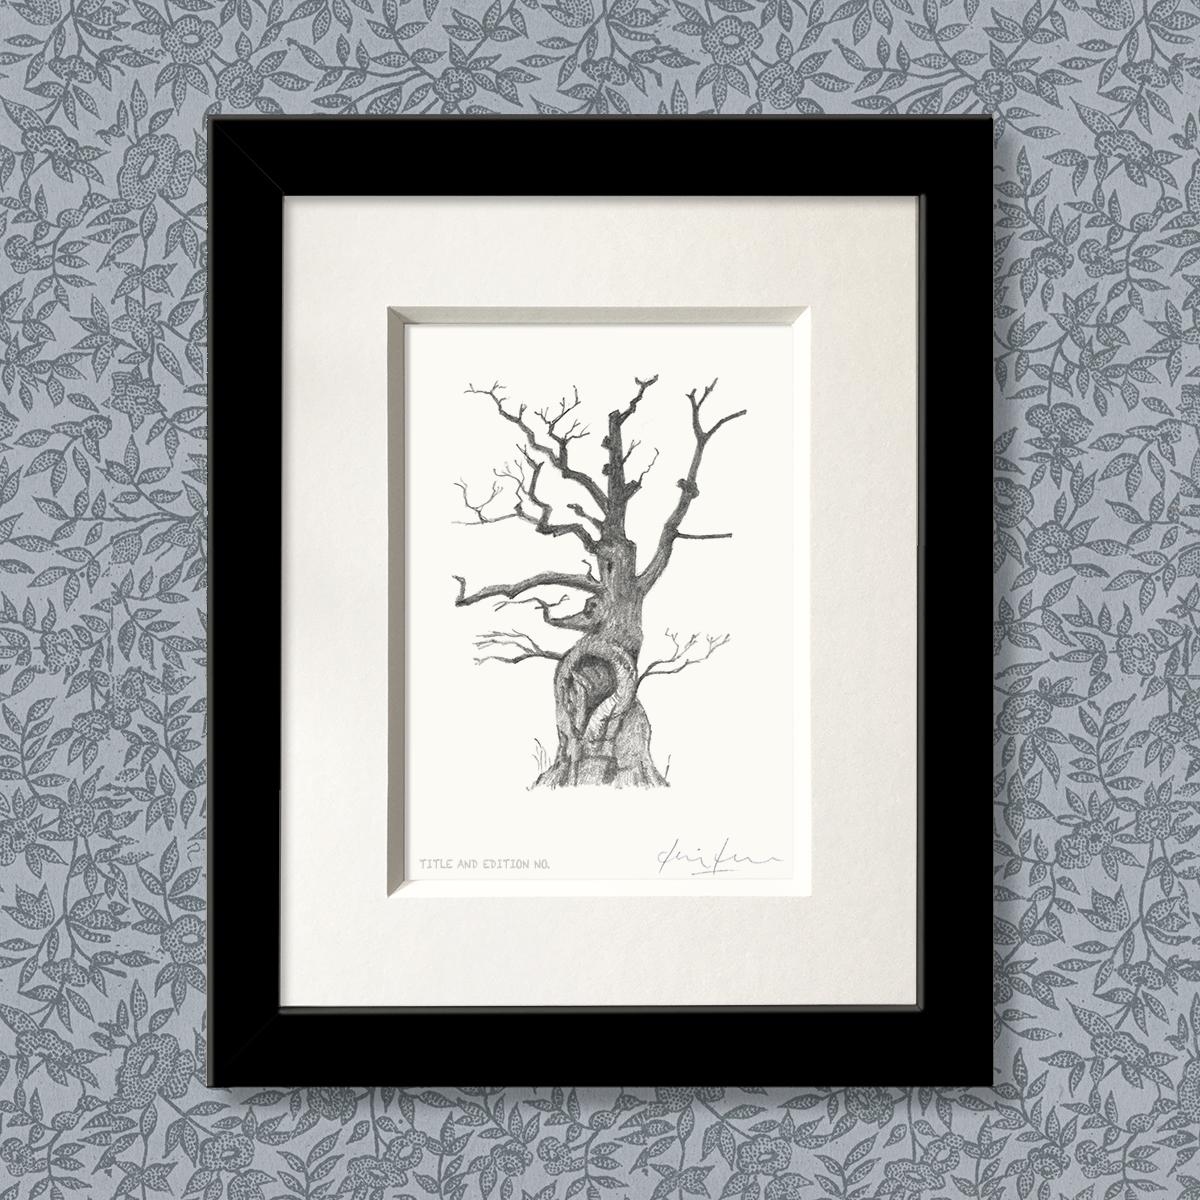 Limited edition print from pencil sketch of a tree in a black frame